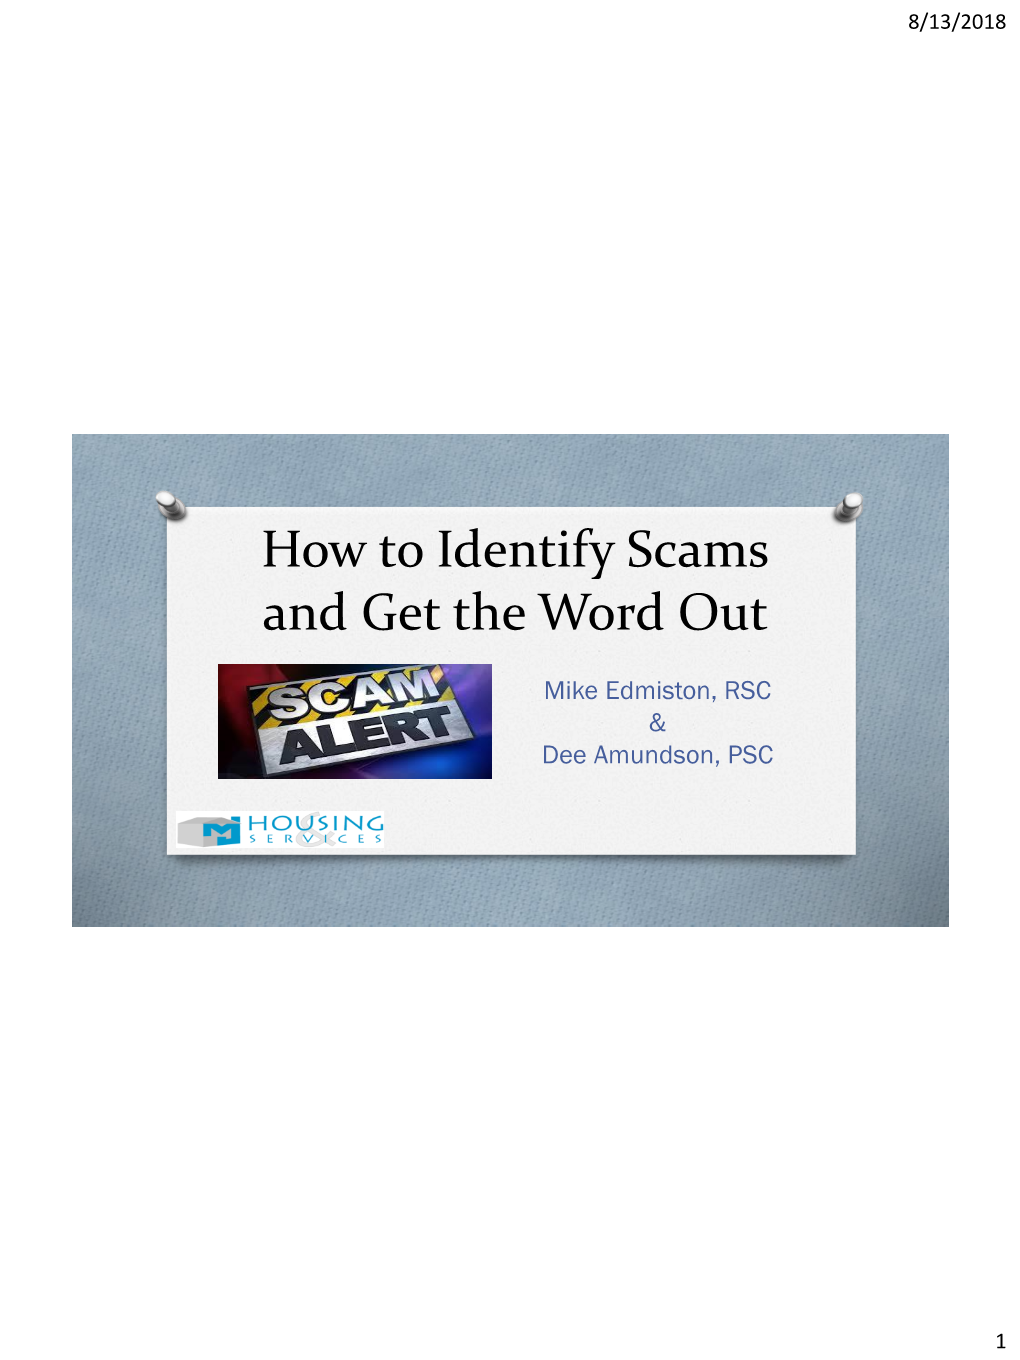 How to Identify Scams and Get the Word Out